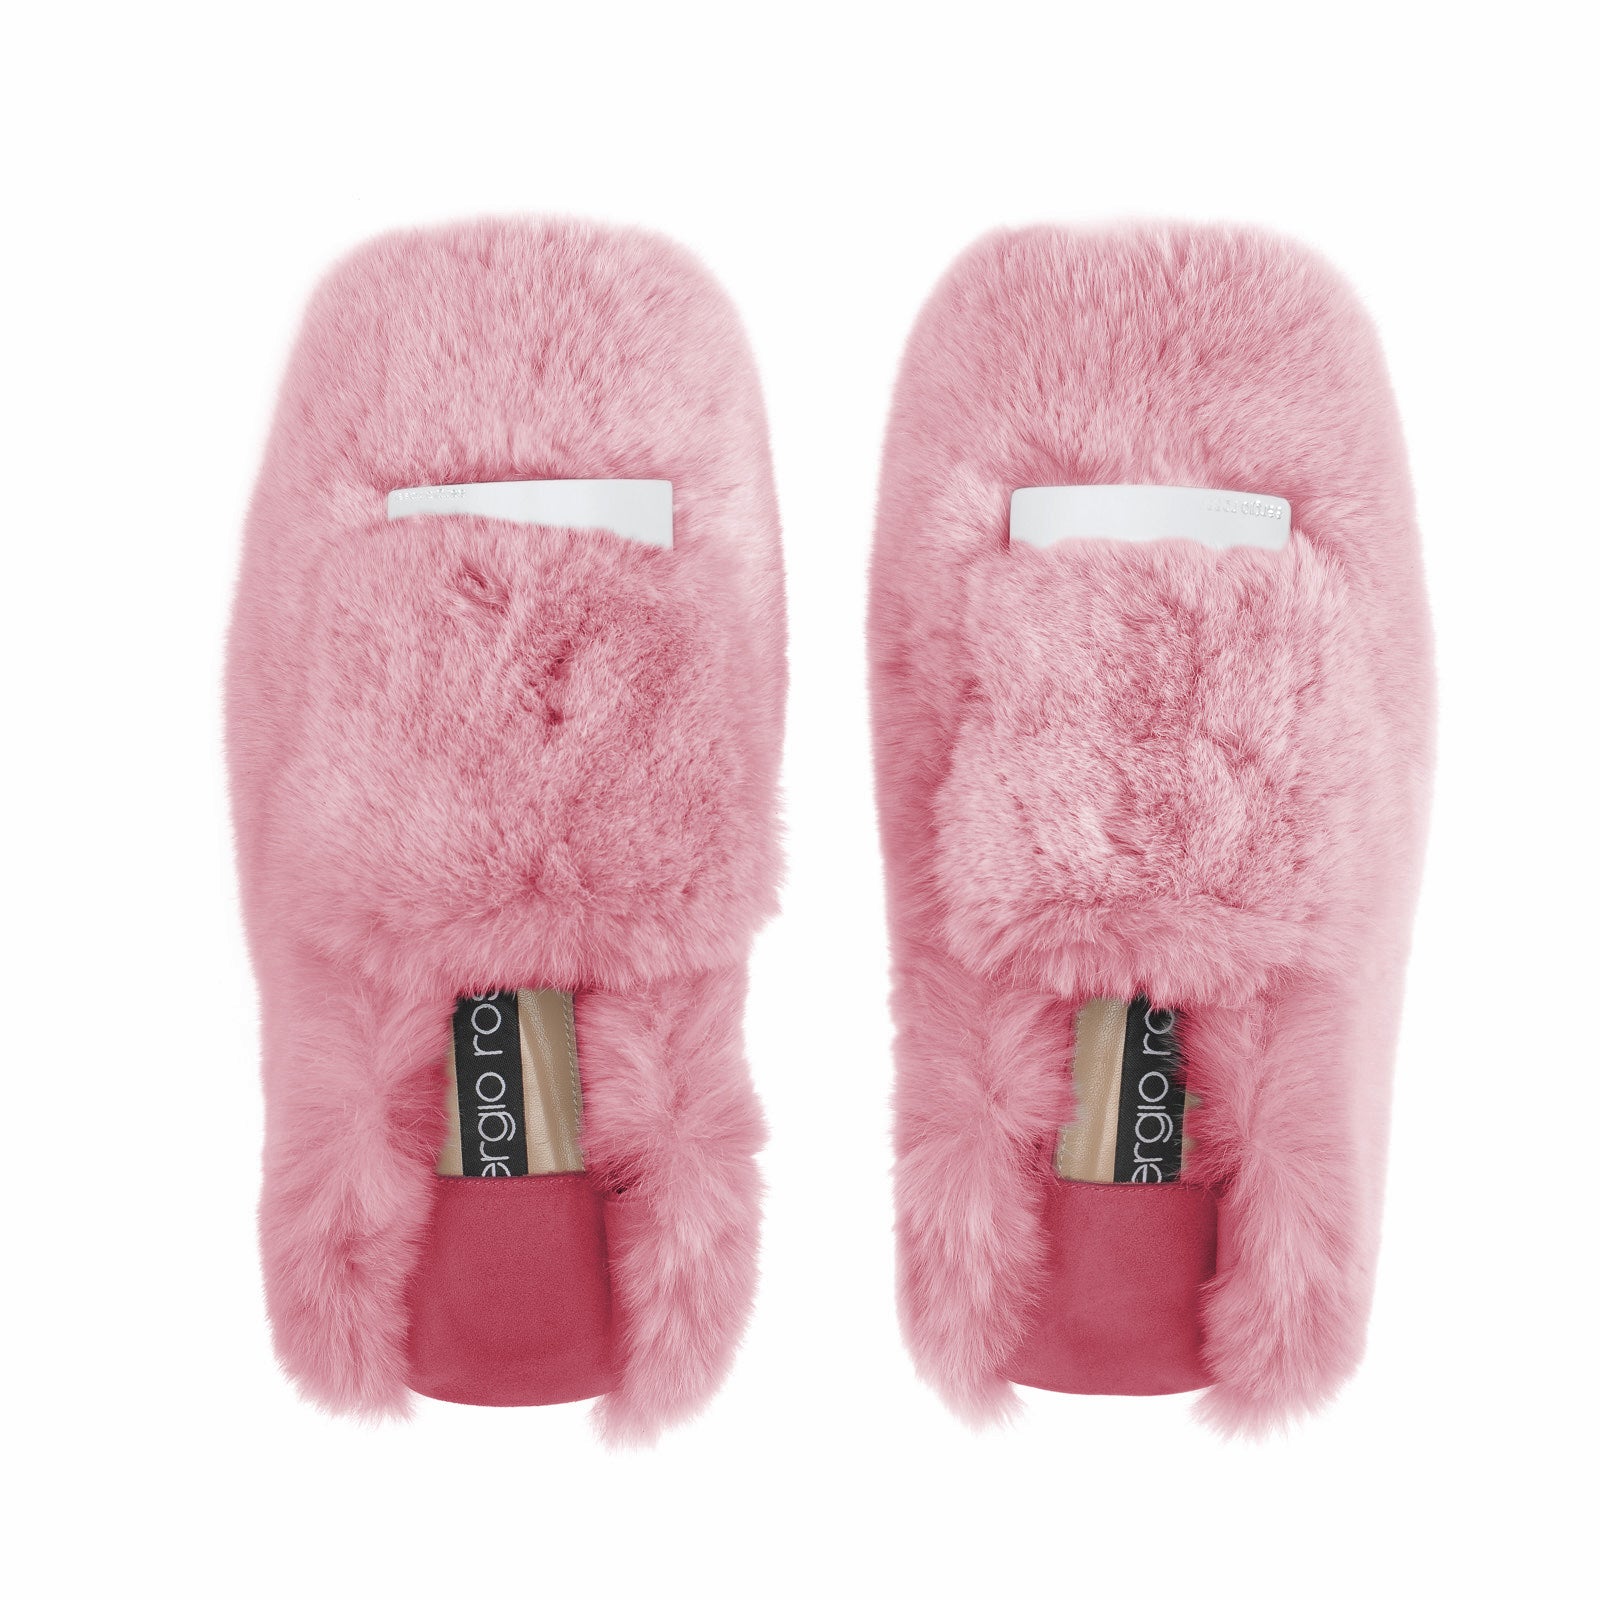 Sr1 fur loafers - Lampone